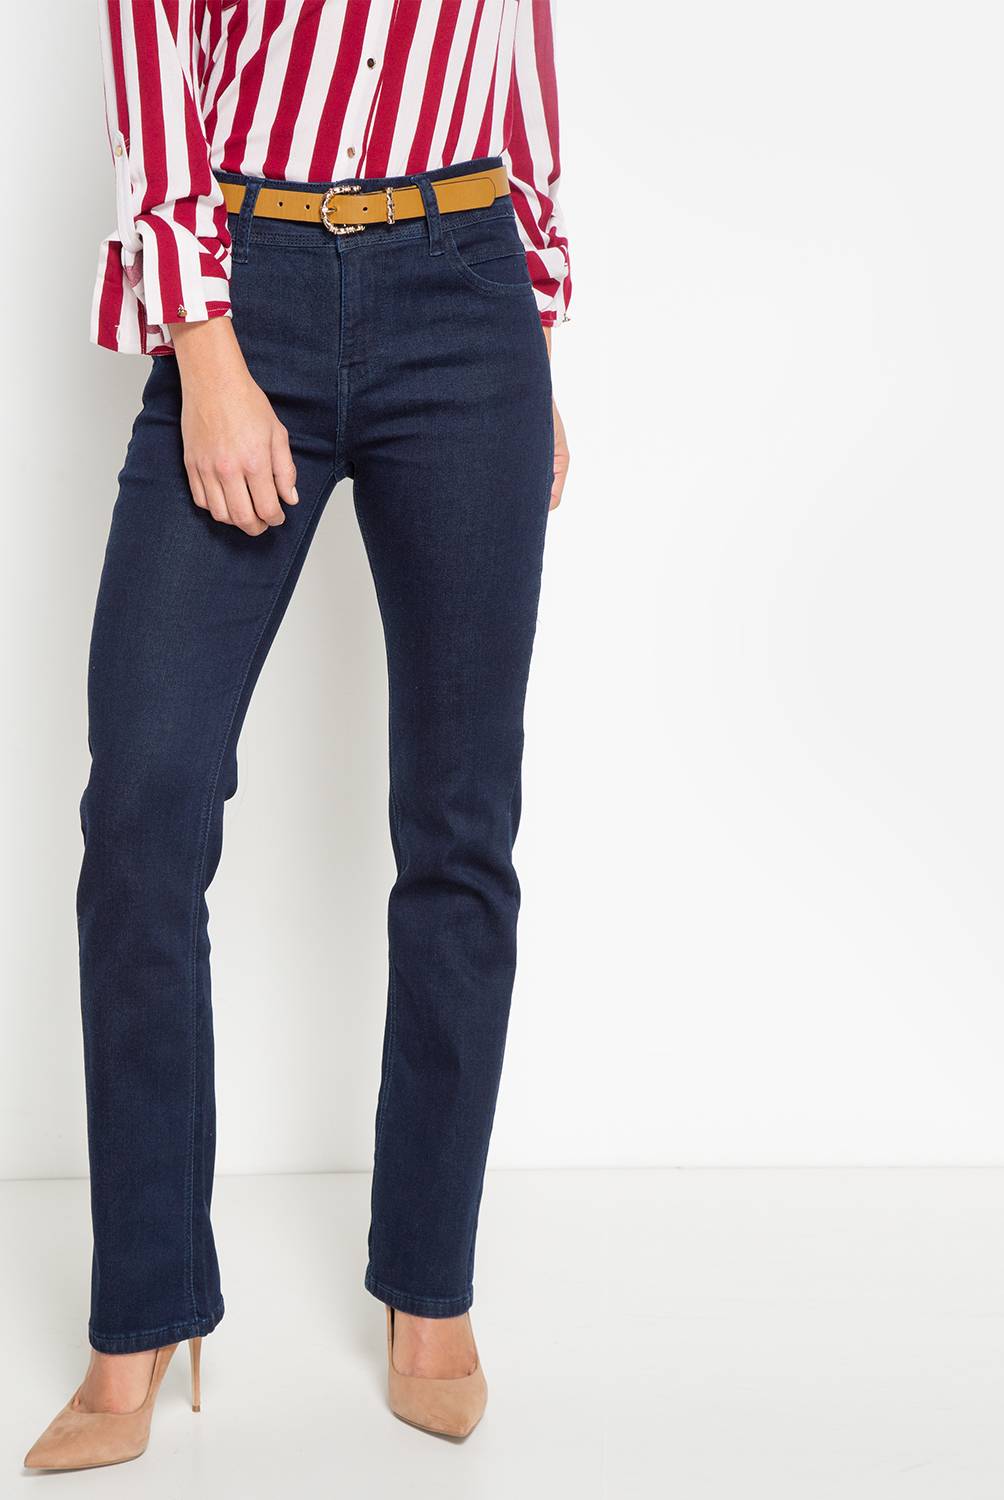 APOLOGY - Jeans Skinny Mujer